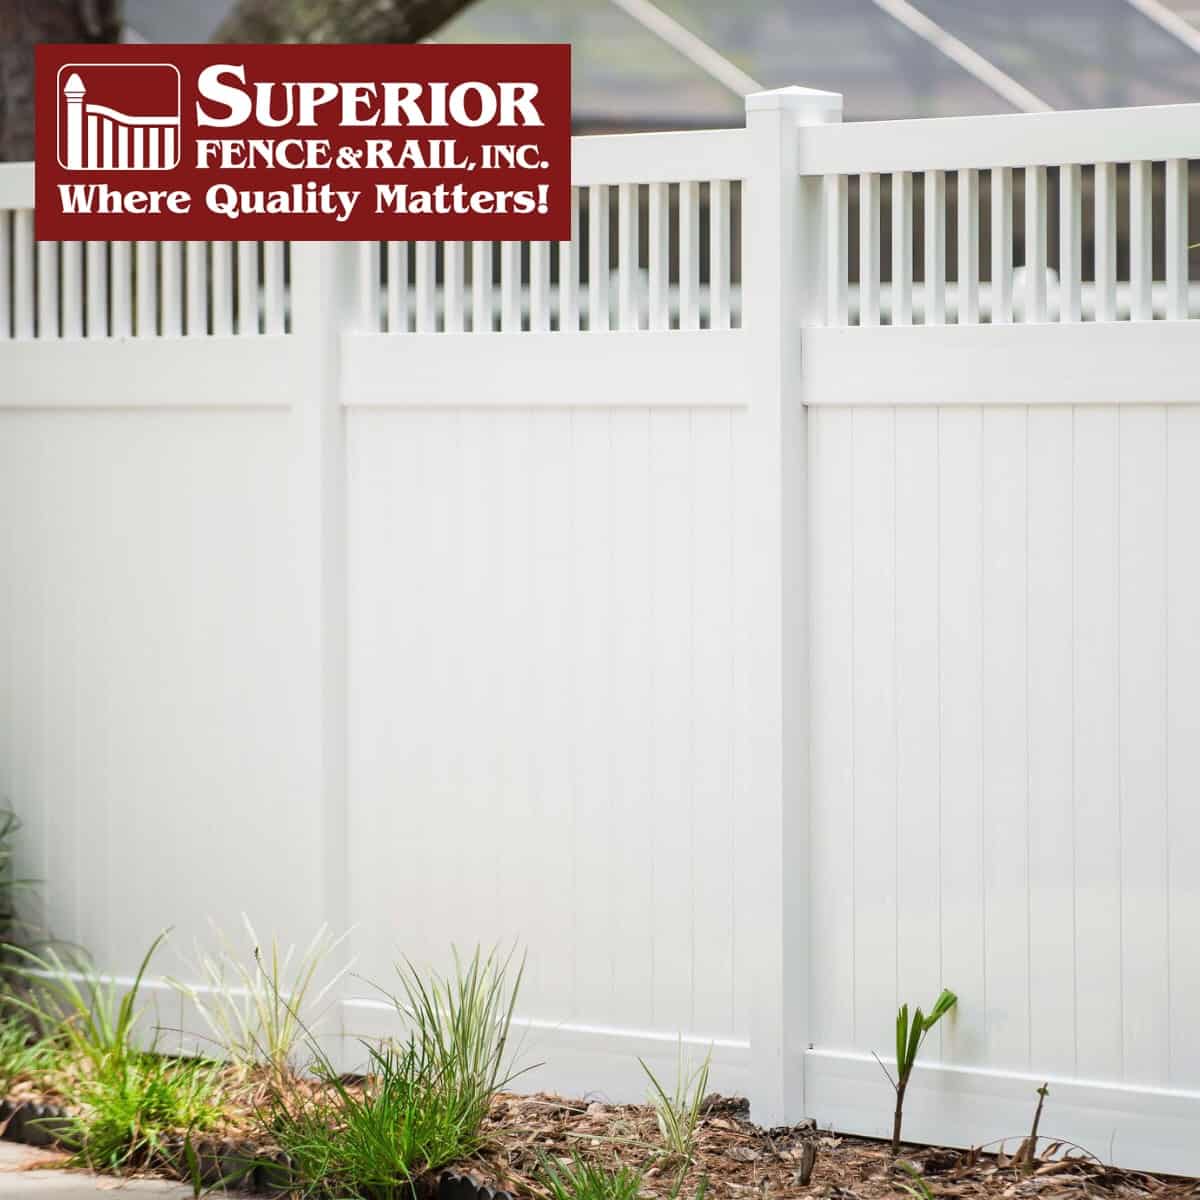 Star Fence Company Contractor